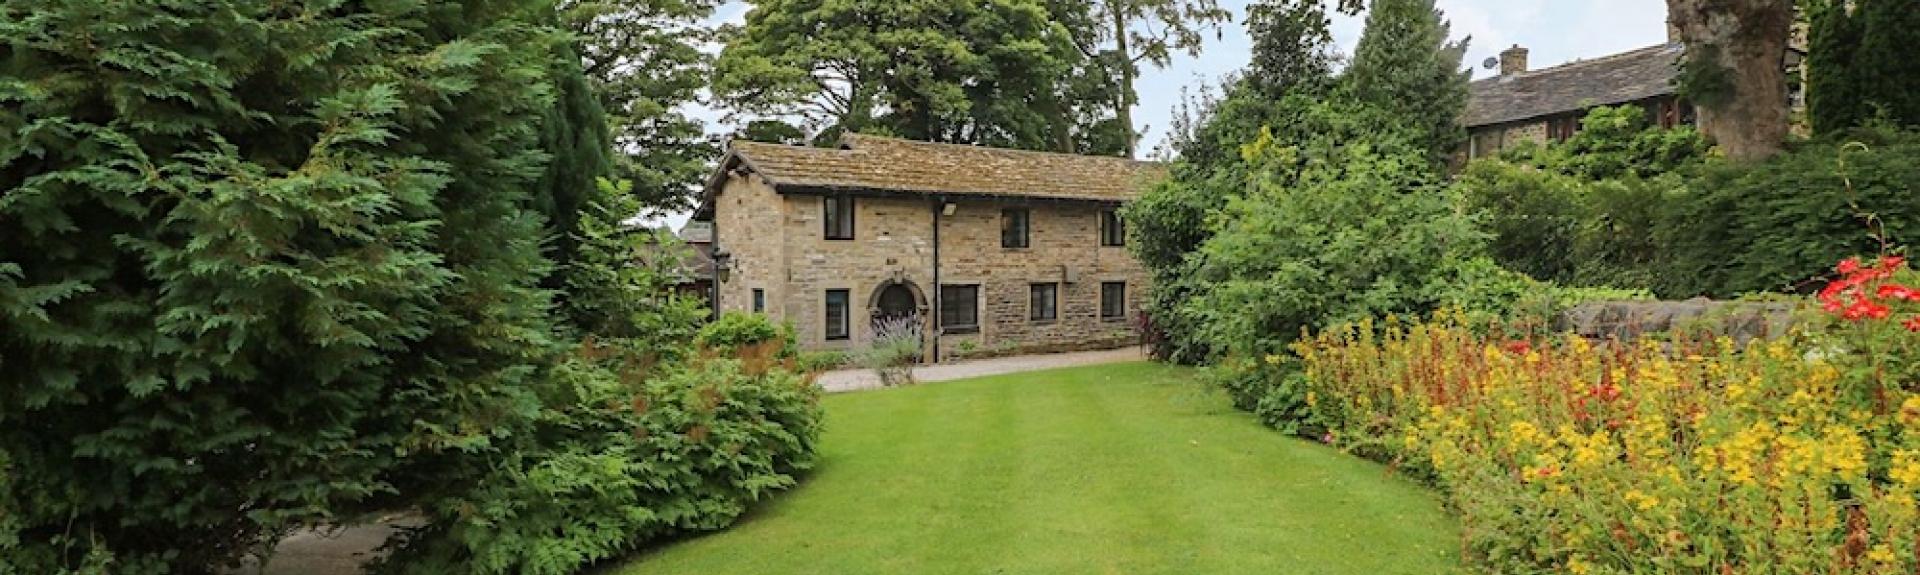 A Somerset stone barn conversion overlooks a large lawn lined by flower beds and shrubs.